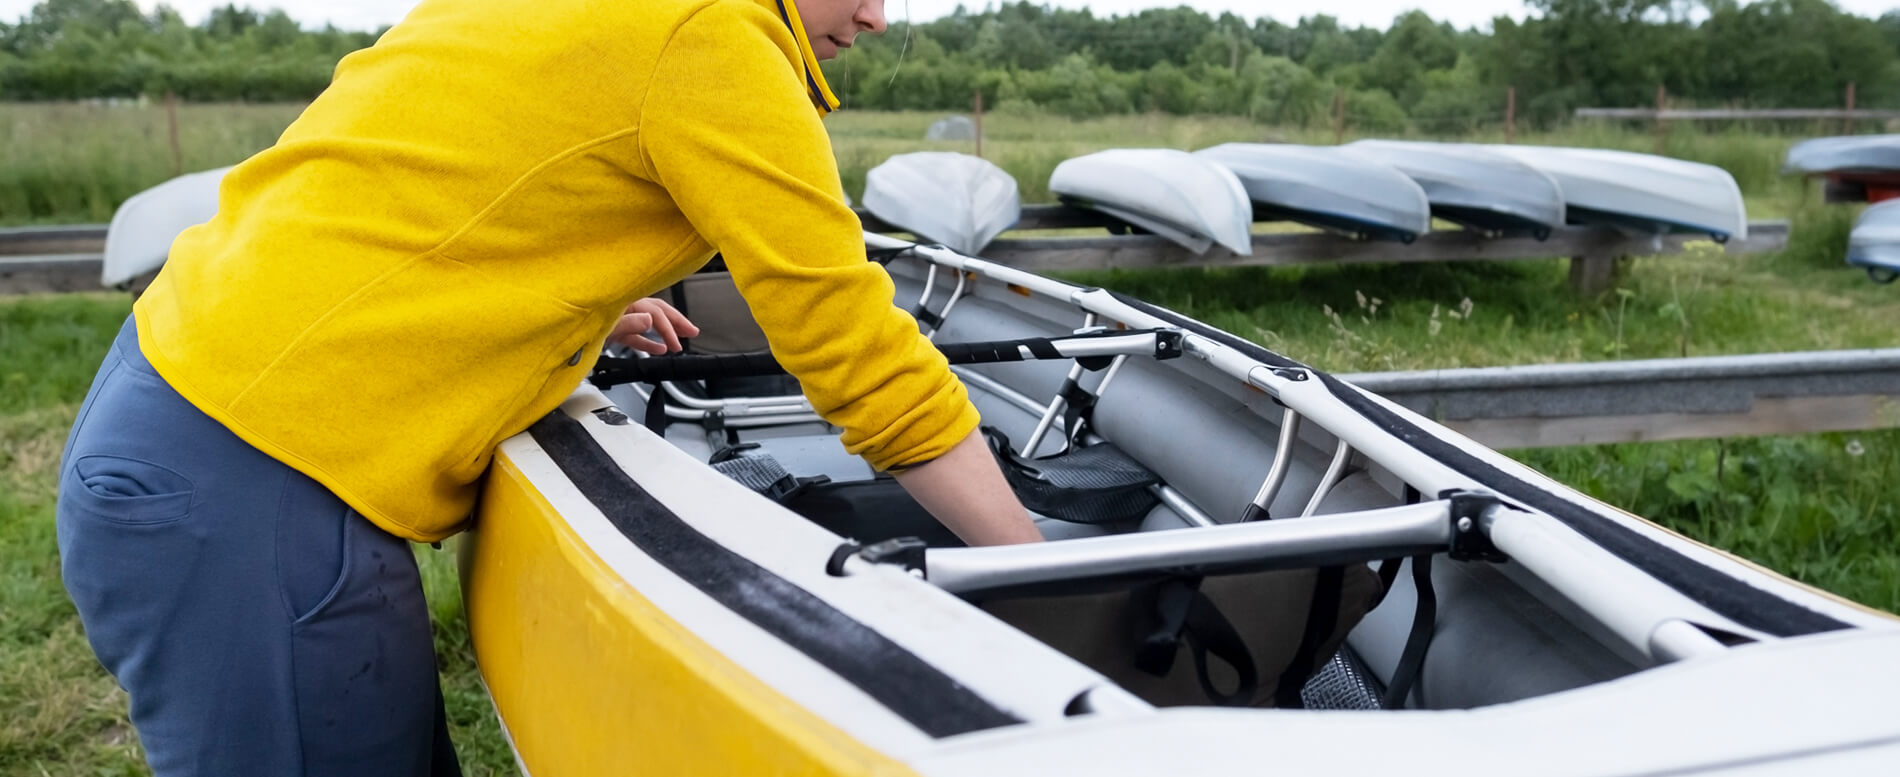 The 29 Kayaking Accessories You Need for Your Next Paddling Trip